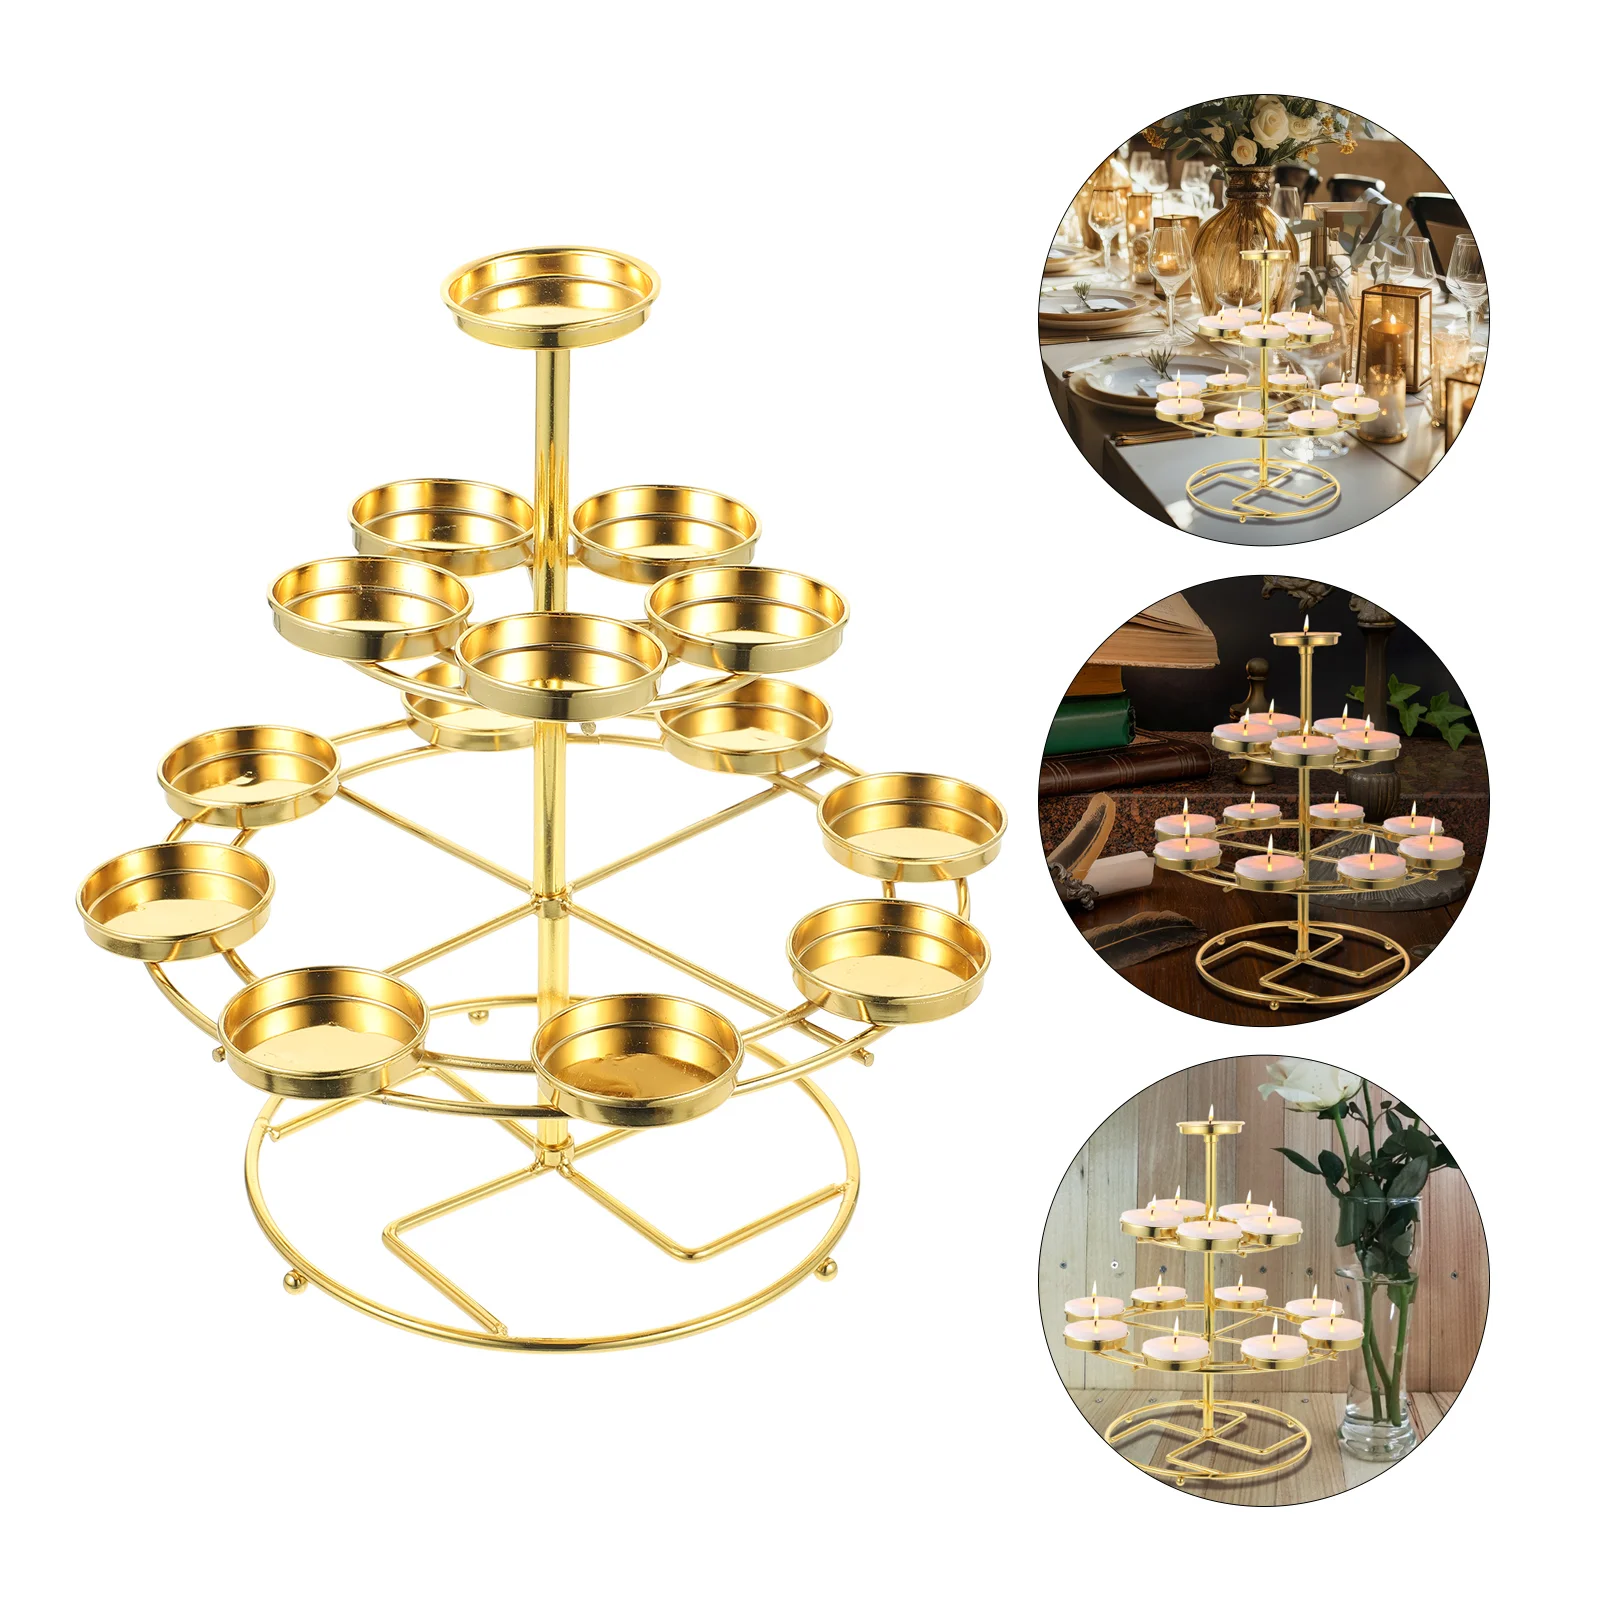 

Butter Lamp Holder Candlestick Holders For Taper Tapered Metal Decorative Stand Lotus Shaped Candleholder Religious